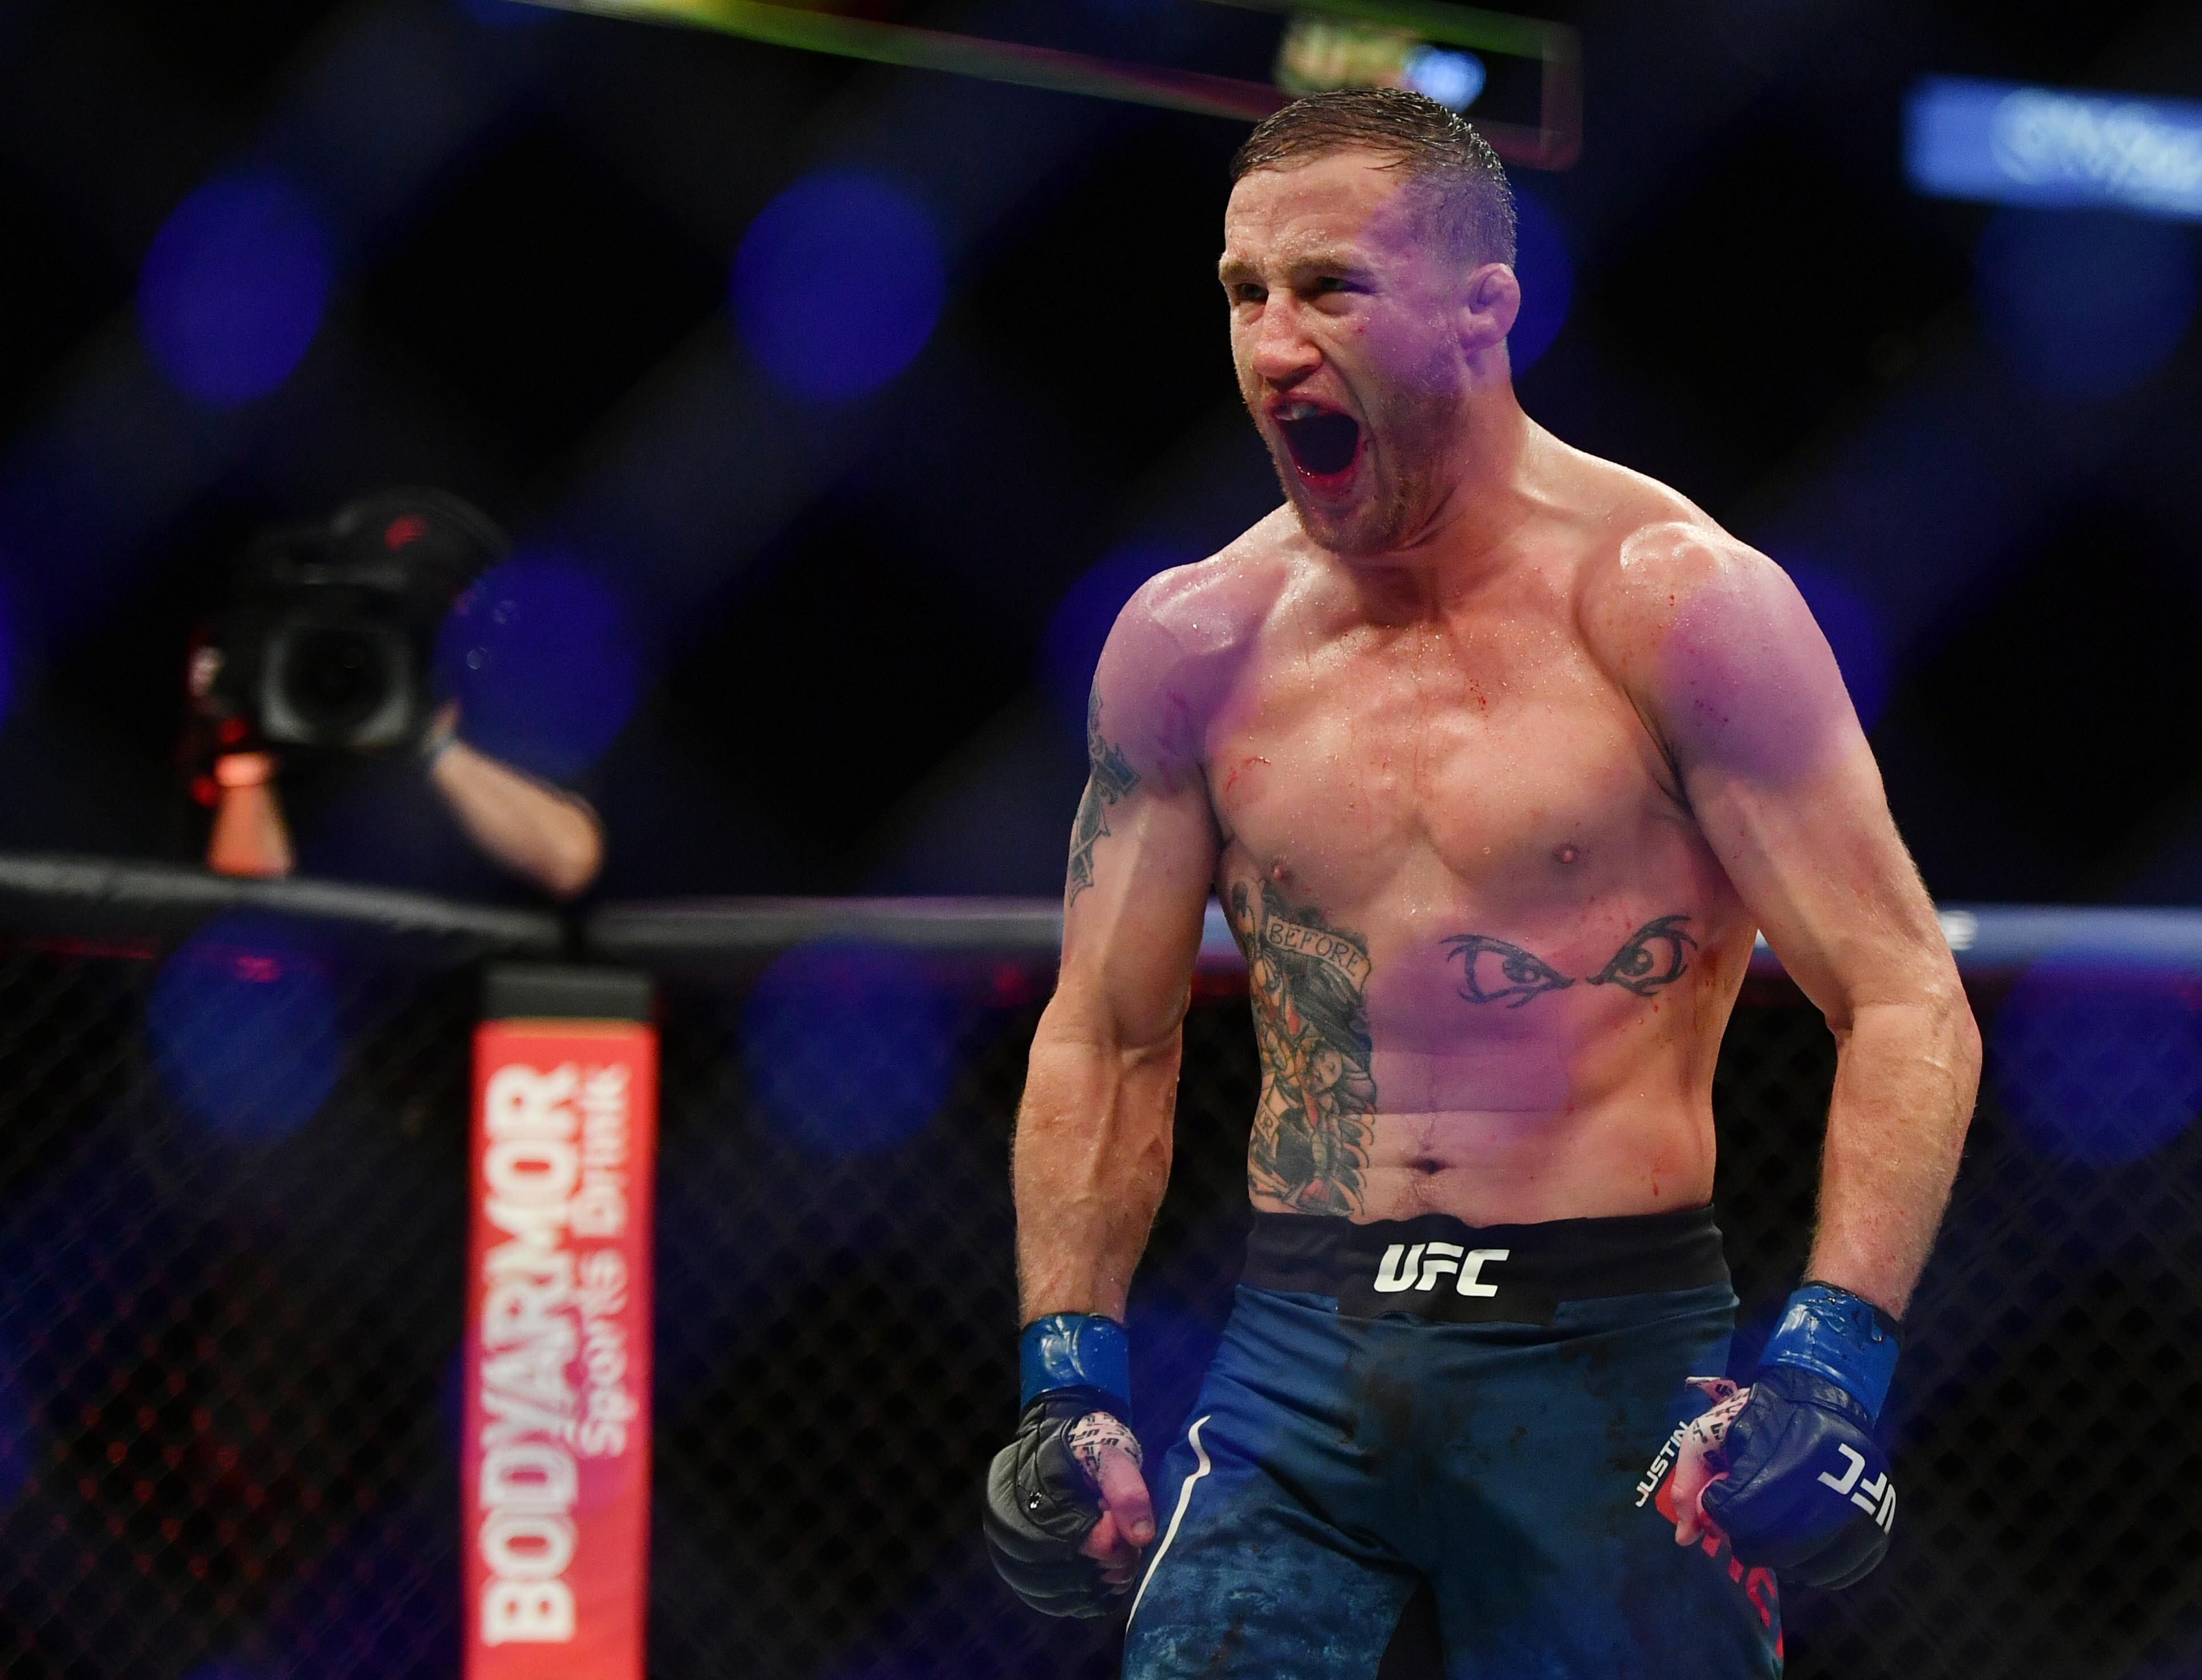 Justin Gaethje is taking a bit of a beating from his training partner Kamaru Usman. Photo: USA TODAY Sports